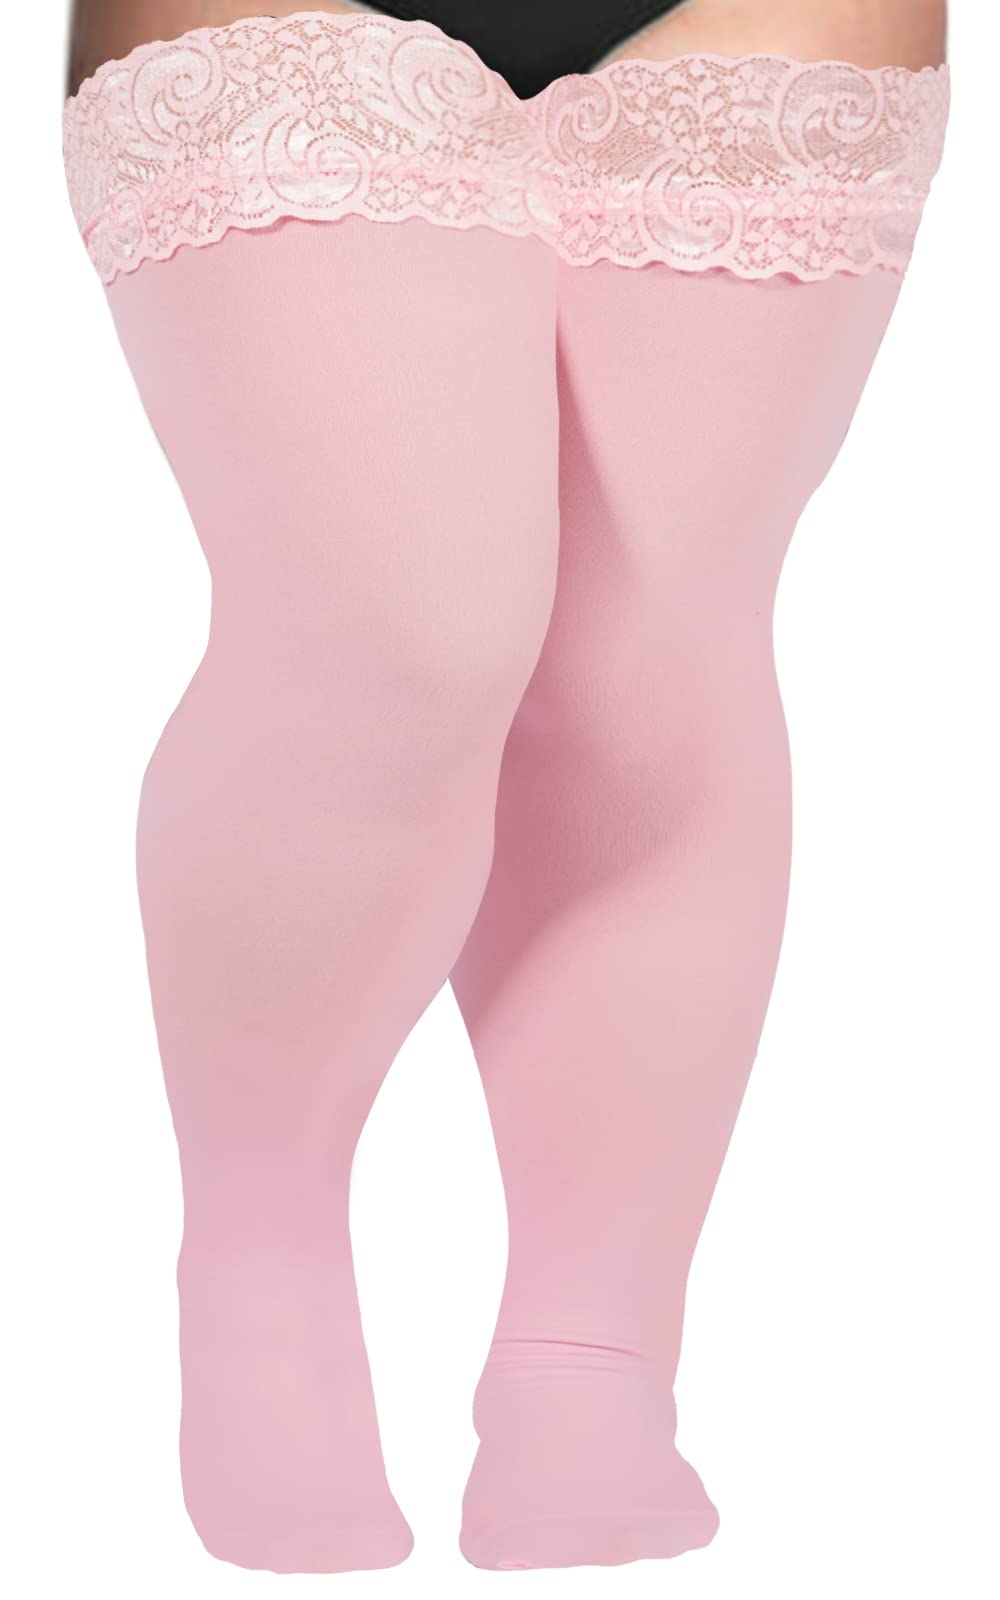 http://moonwoodwear.com/cdn/shop/files/55D-Semi-Sheer-Silicone-Lace-Stay-Up-Thigh-Highs-Pantyhose-Light-Pink1.jpg?v=1683602529